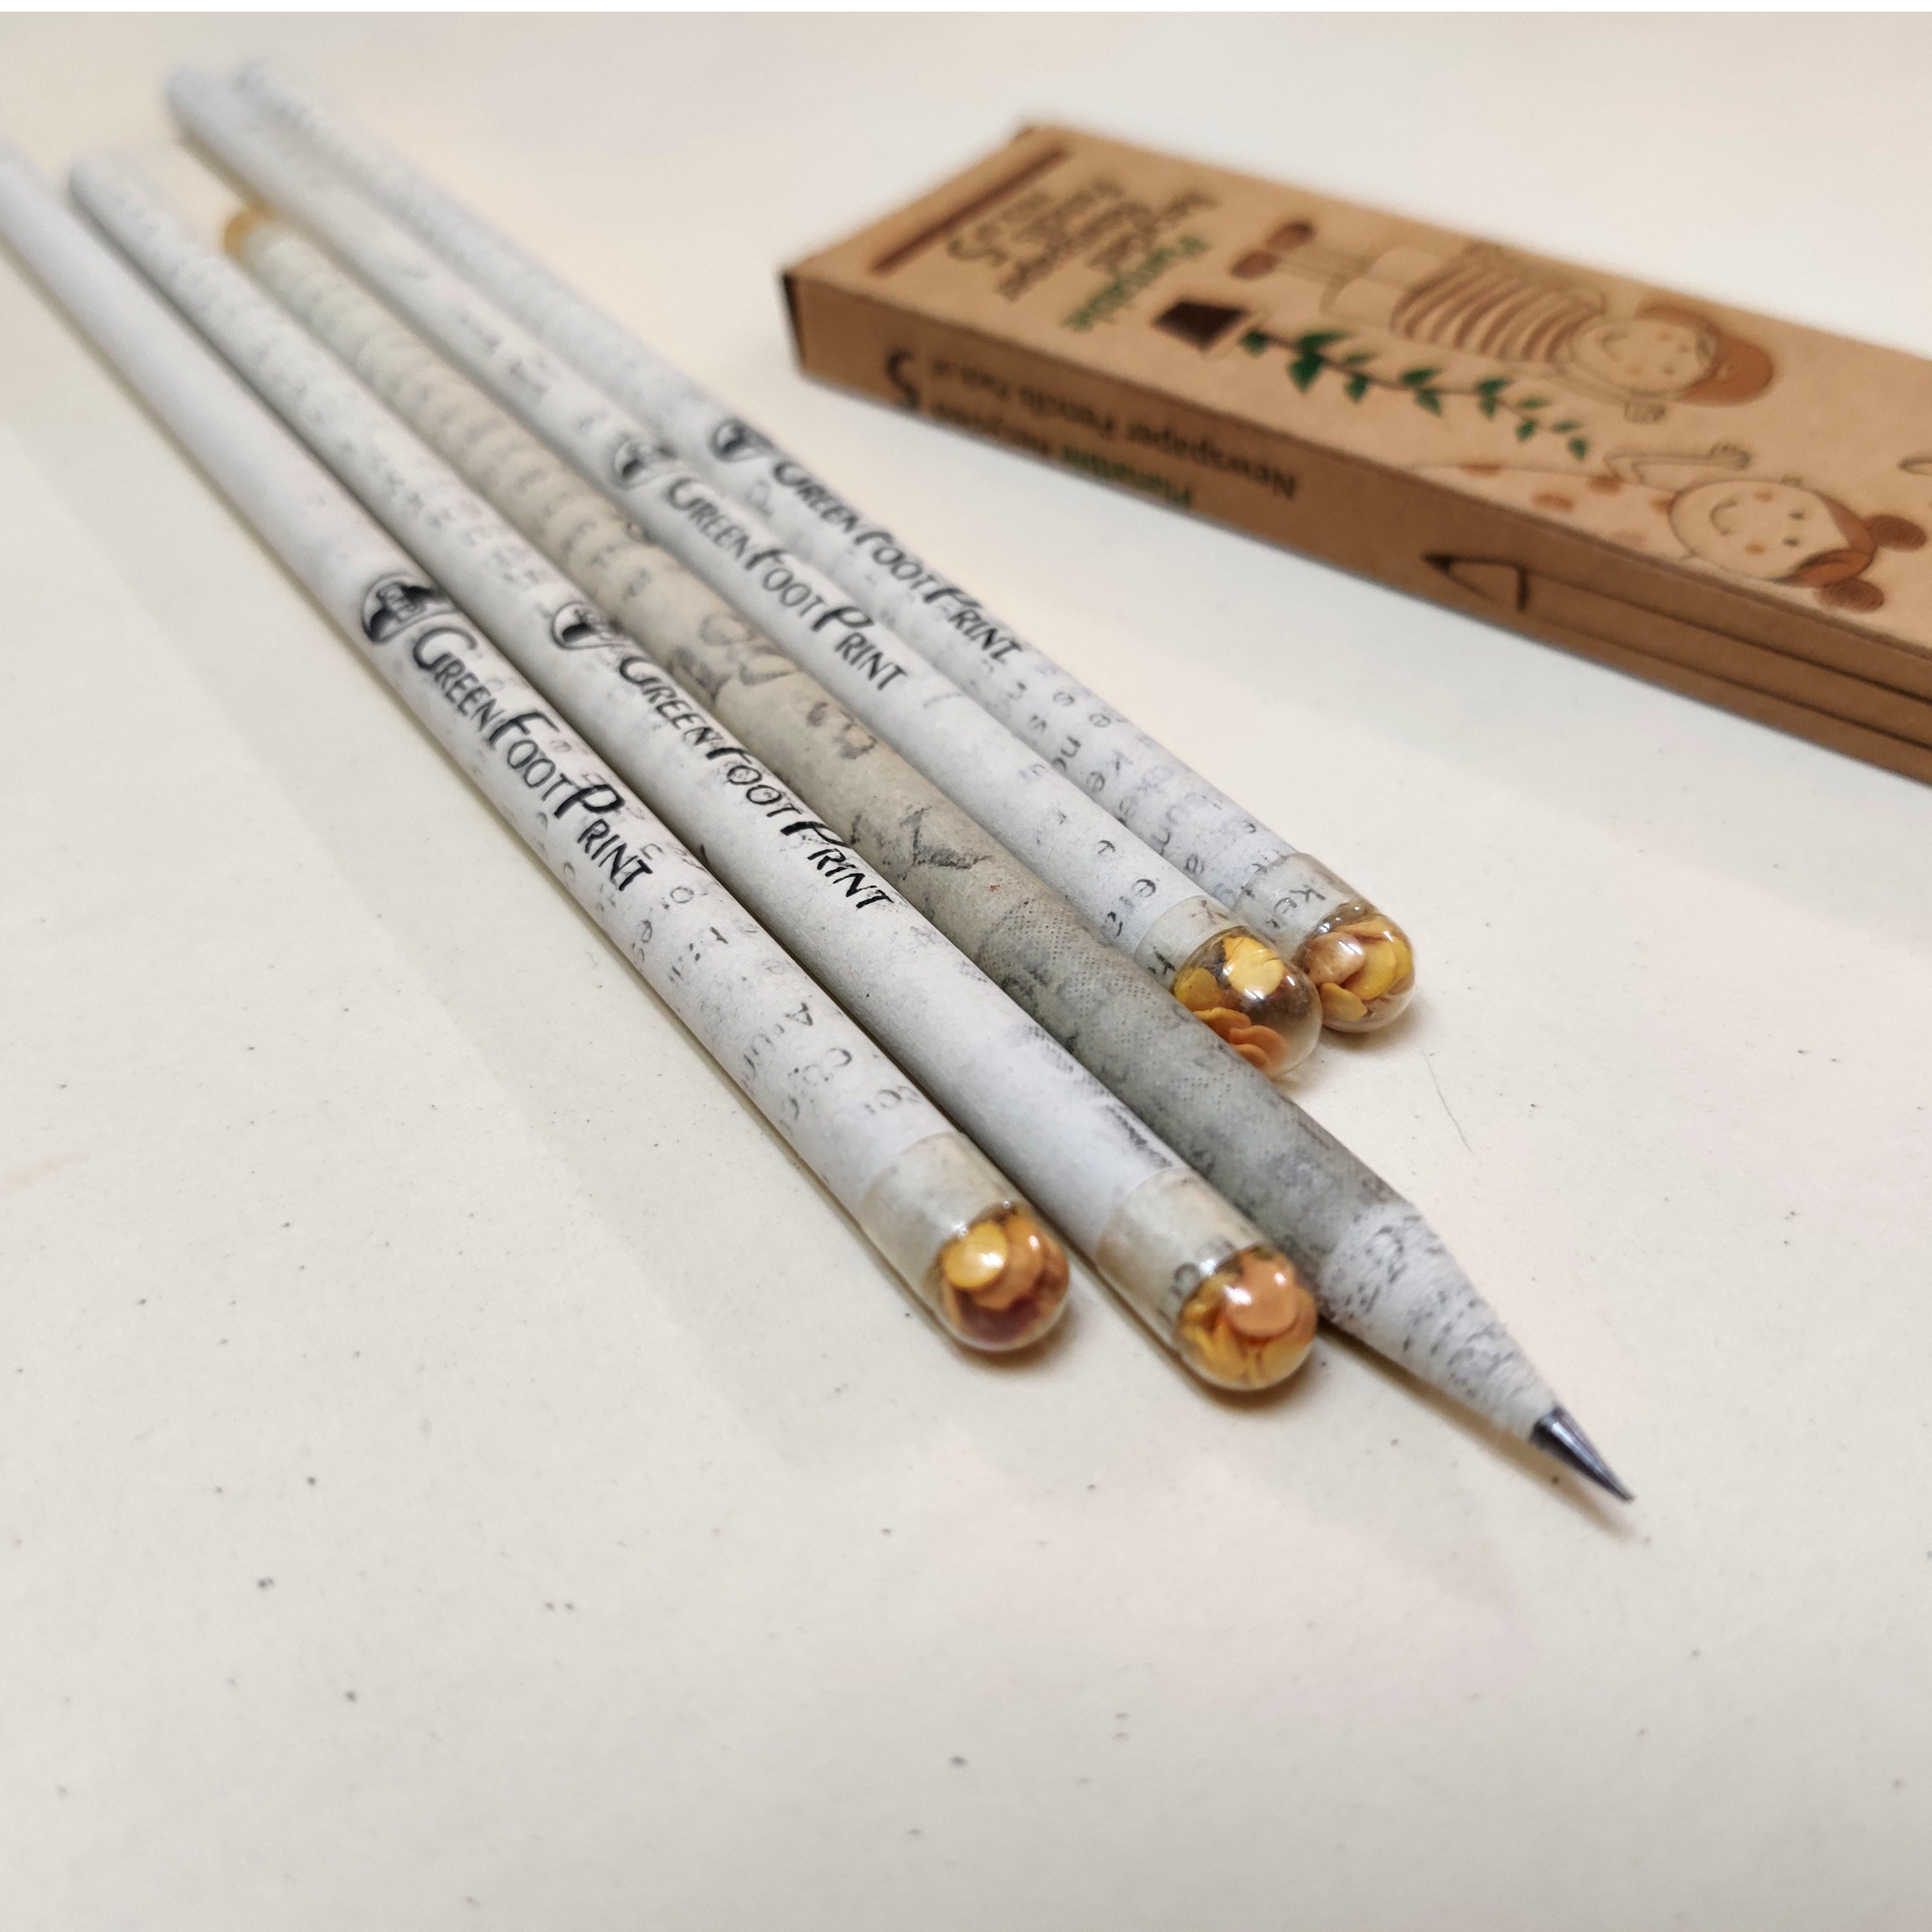 Eco Seed Pens, Plantable Eco Pens, Recycled Paper Body and Cap